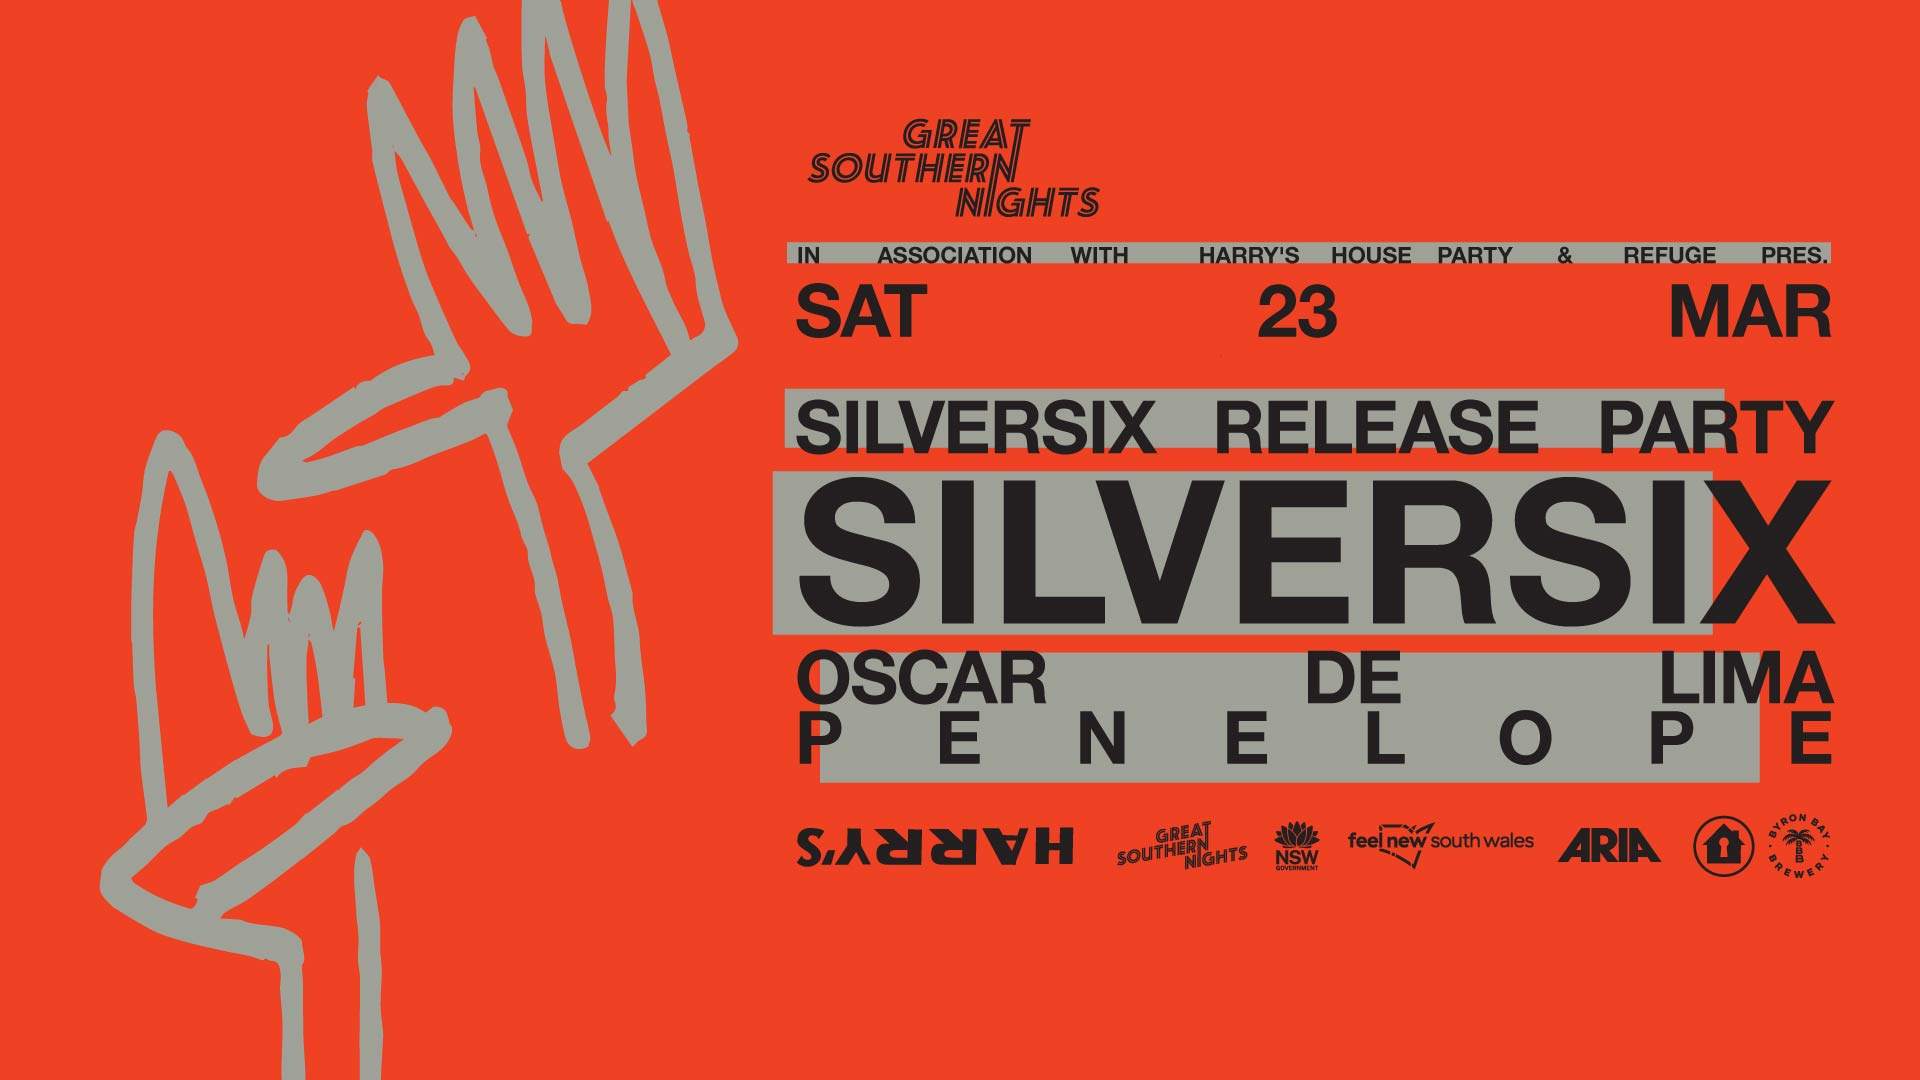 Great Southern Nights x Harry's x Refuge pres. Silversix Release Party - Página frontal